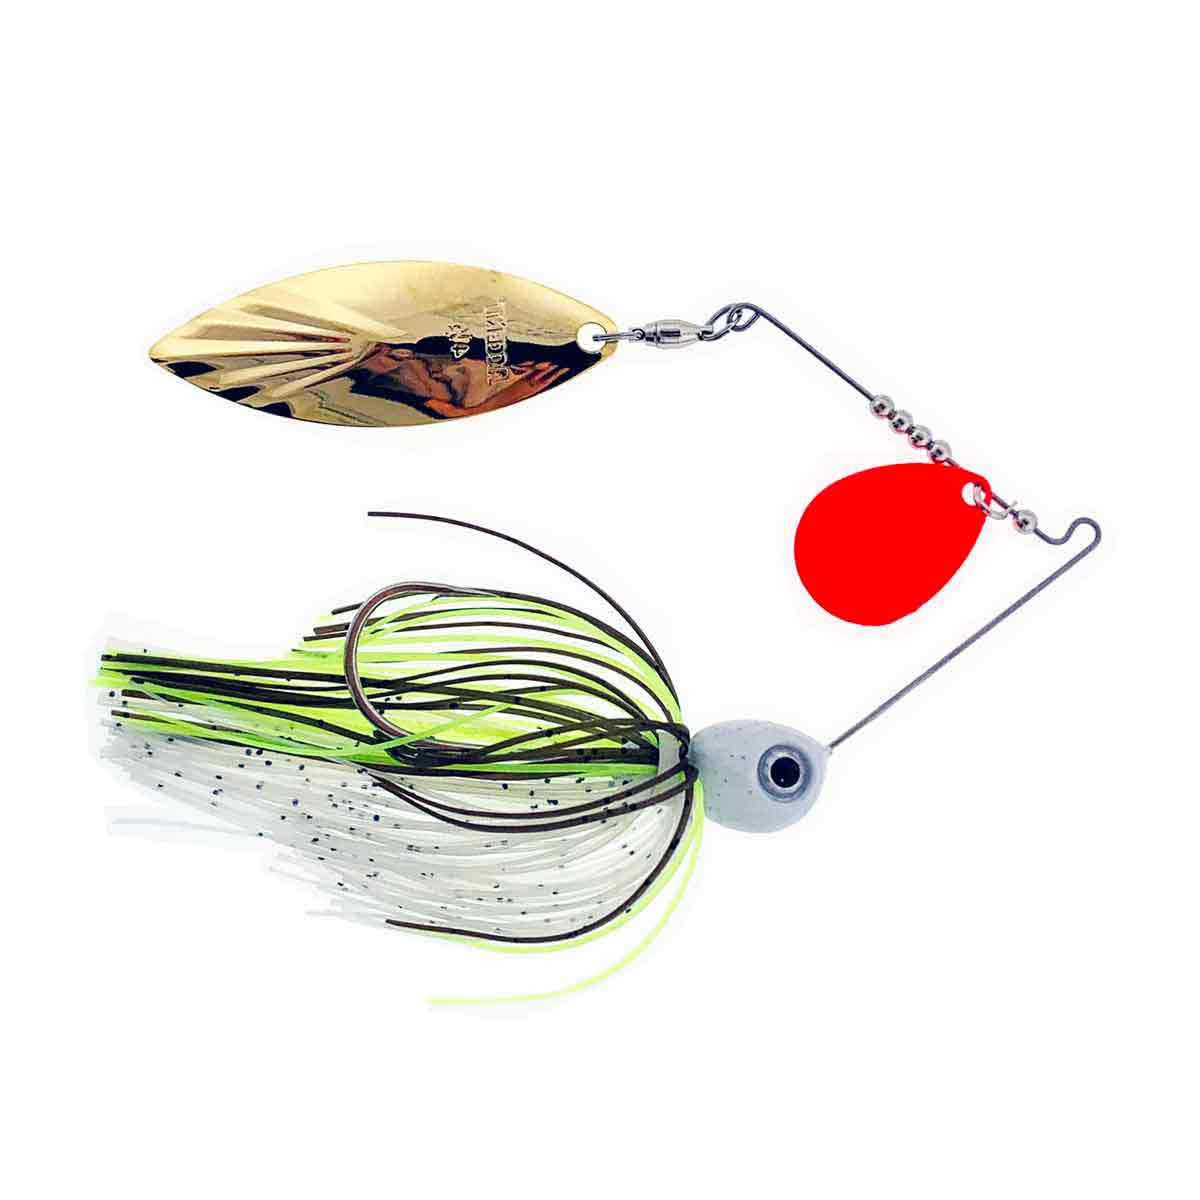 Mark Dove River Special Colorado/Willow Spinnerbait _Threadfin Shad Red/Gold